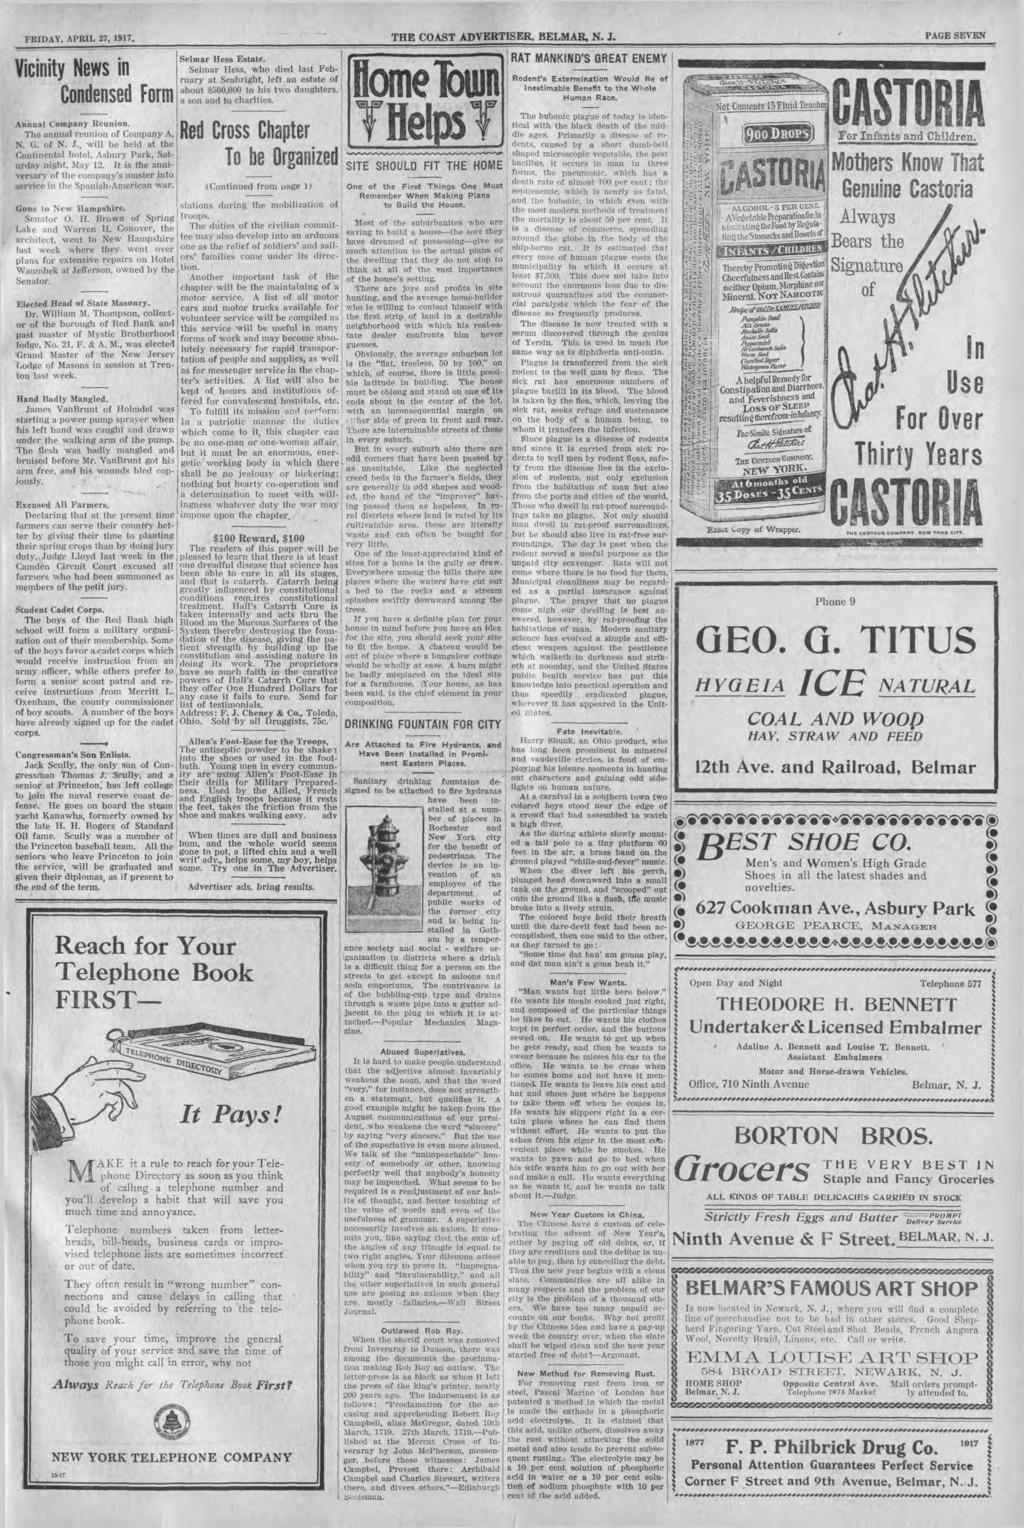 FRDAY, APRL 27, 97. THE COAST ADVERTSER, BELMAR, N. J. PAGE SEVEN Vcnty News n Condensed Form Annual Company Reunon. The annual reunon of Company A, N. G. of N. J., wll be held at the Contnental hotel, Asbury Park, Saturday nght, May 2.